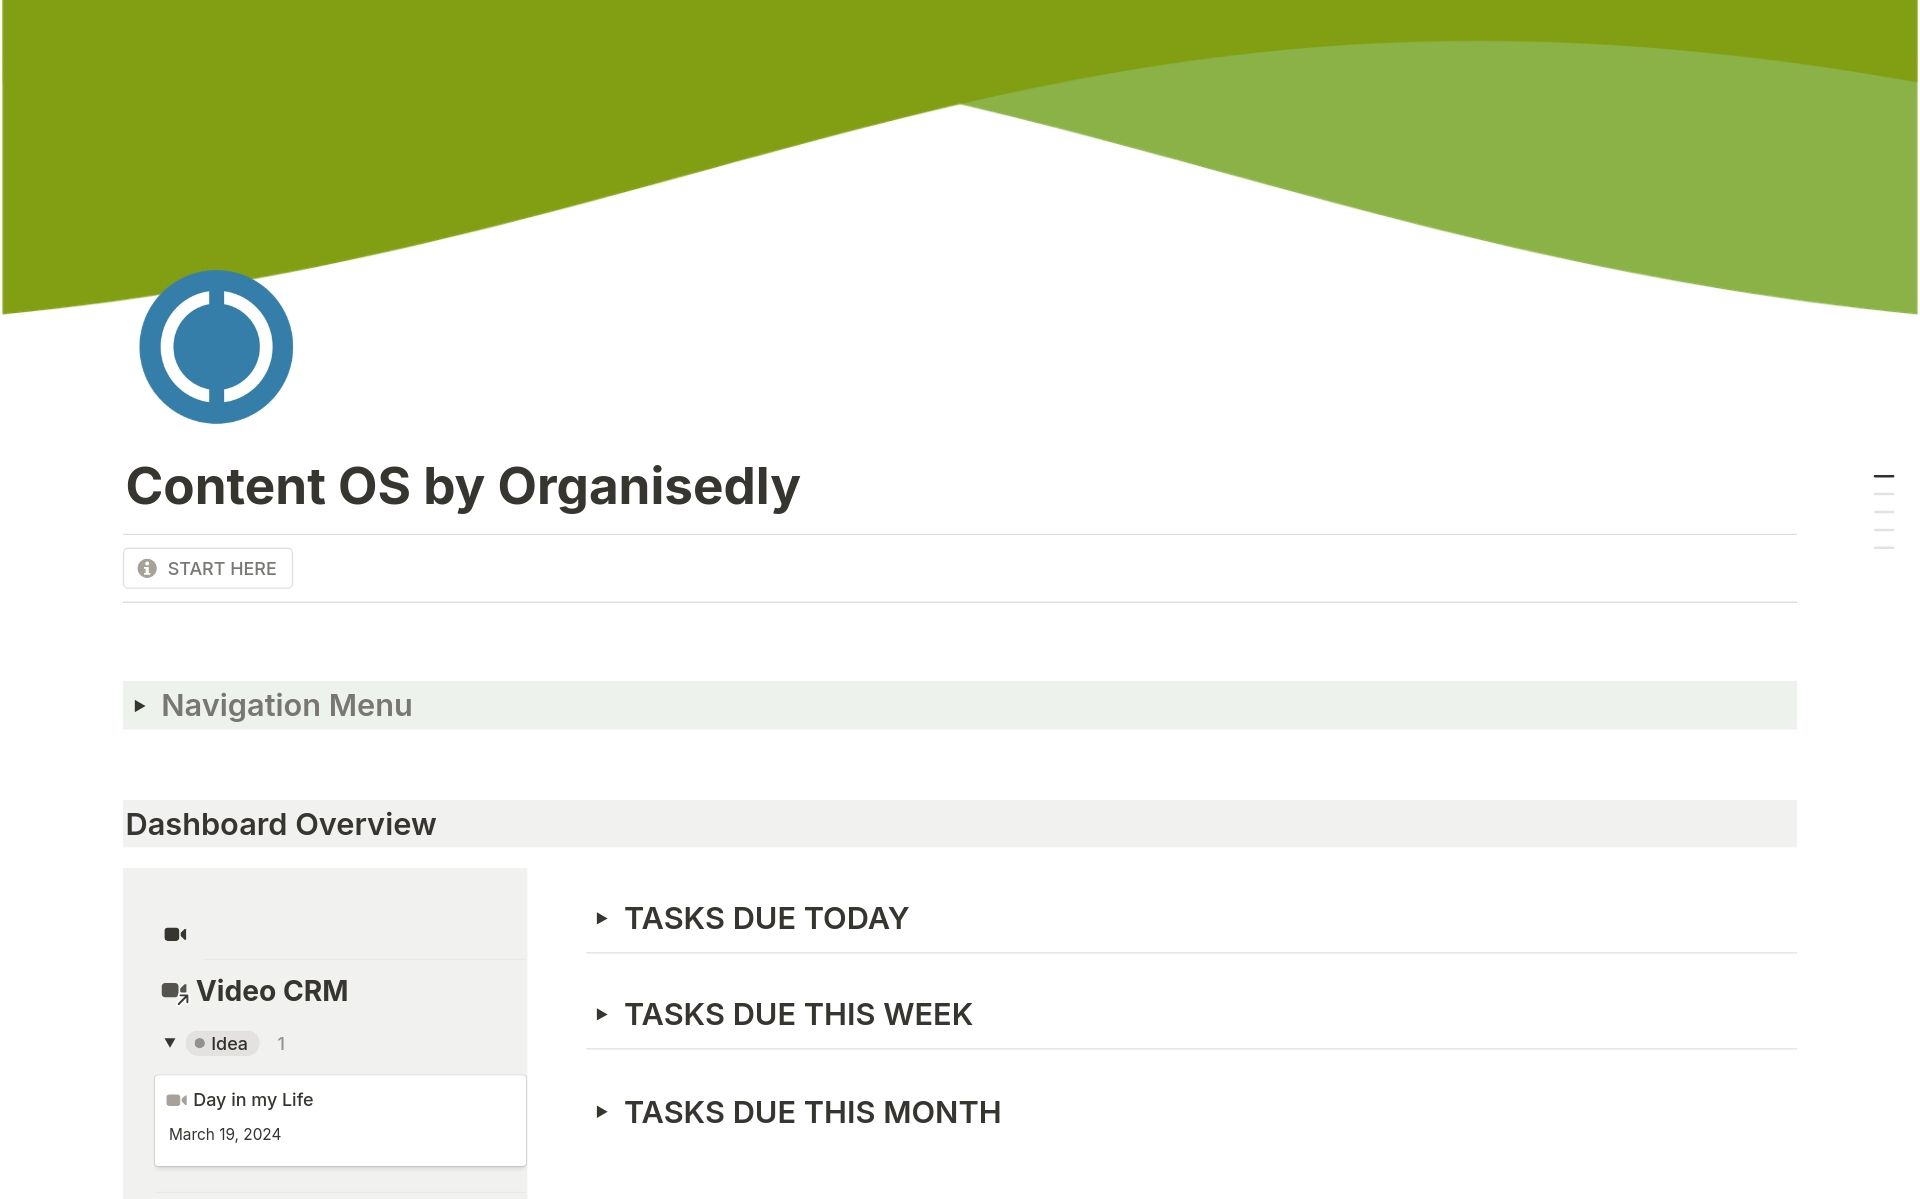 Streamline Your Entire Content Process with Content OS.

Transform your organisation, content creation and management with Content OS by Organisedly. This comprehensive notion template is designed to simplify your content workflow, boost productivity, and ensure you never 